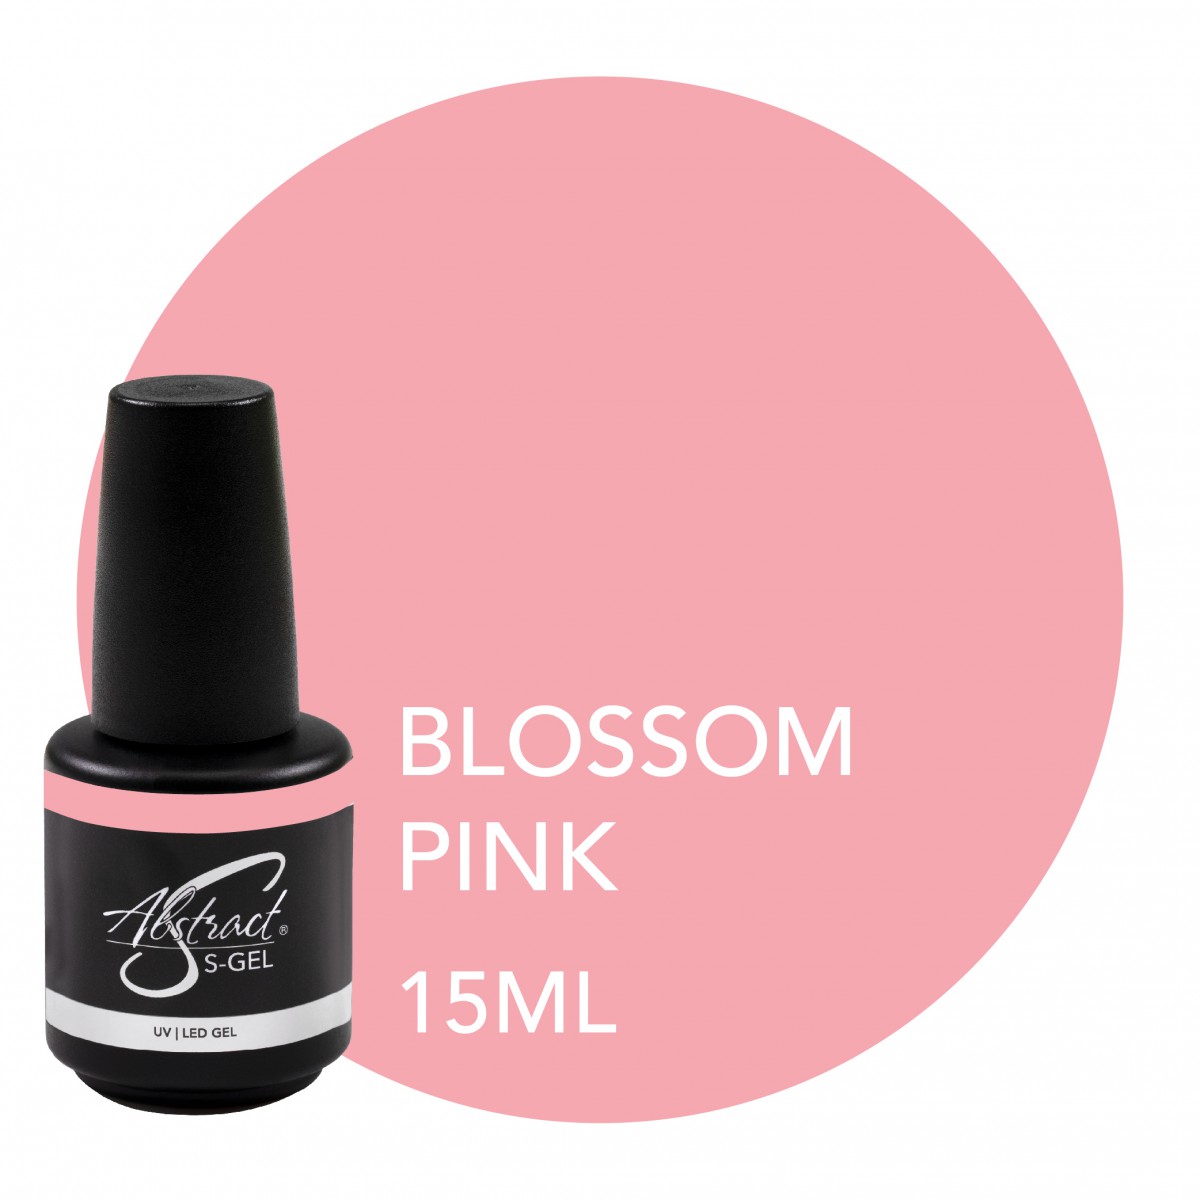 Abstract S-Gel Blossom Pink